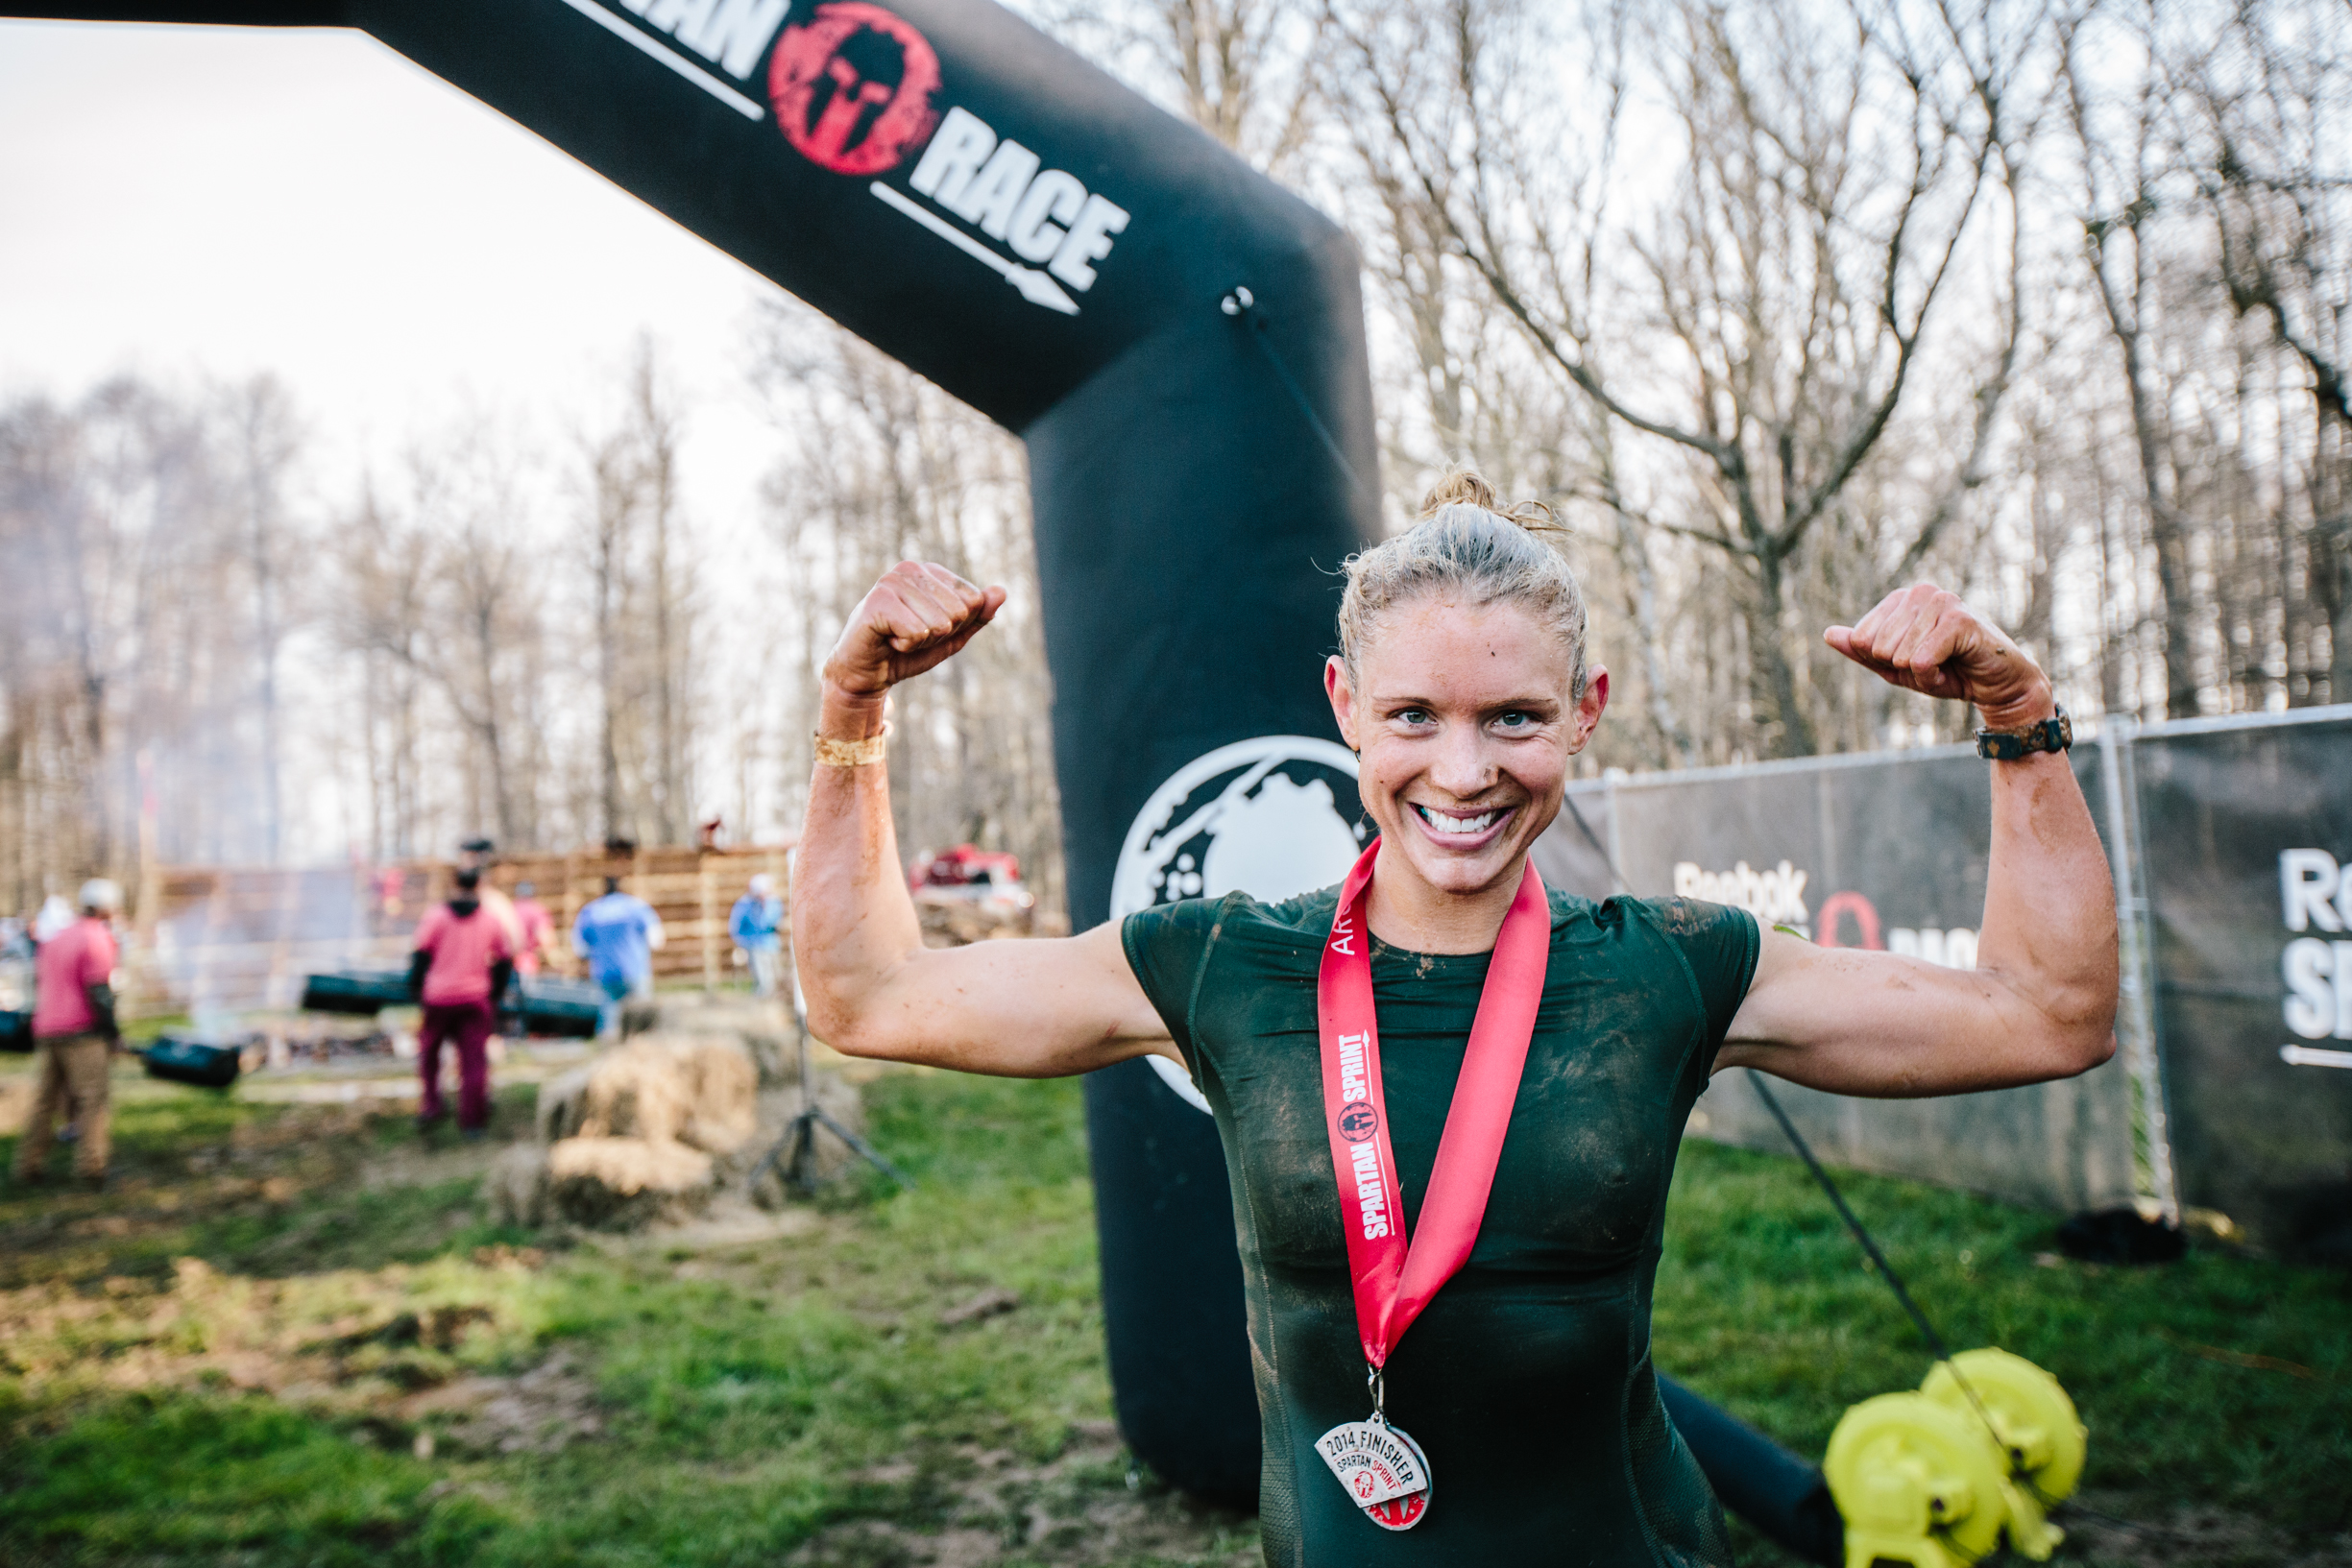 Spartan Sprint: The OCR Race for Beginner and Elite Athletes!